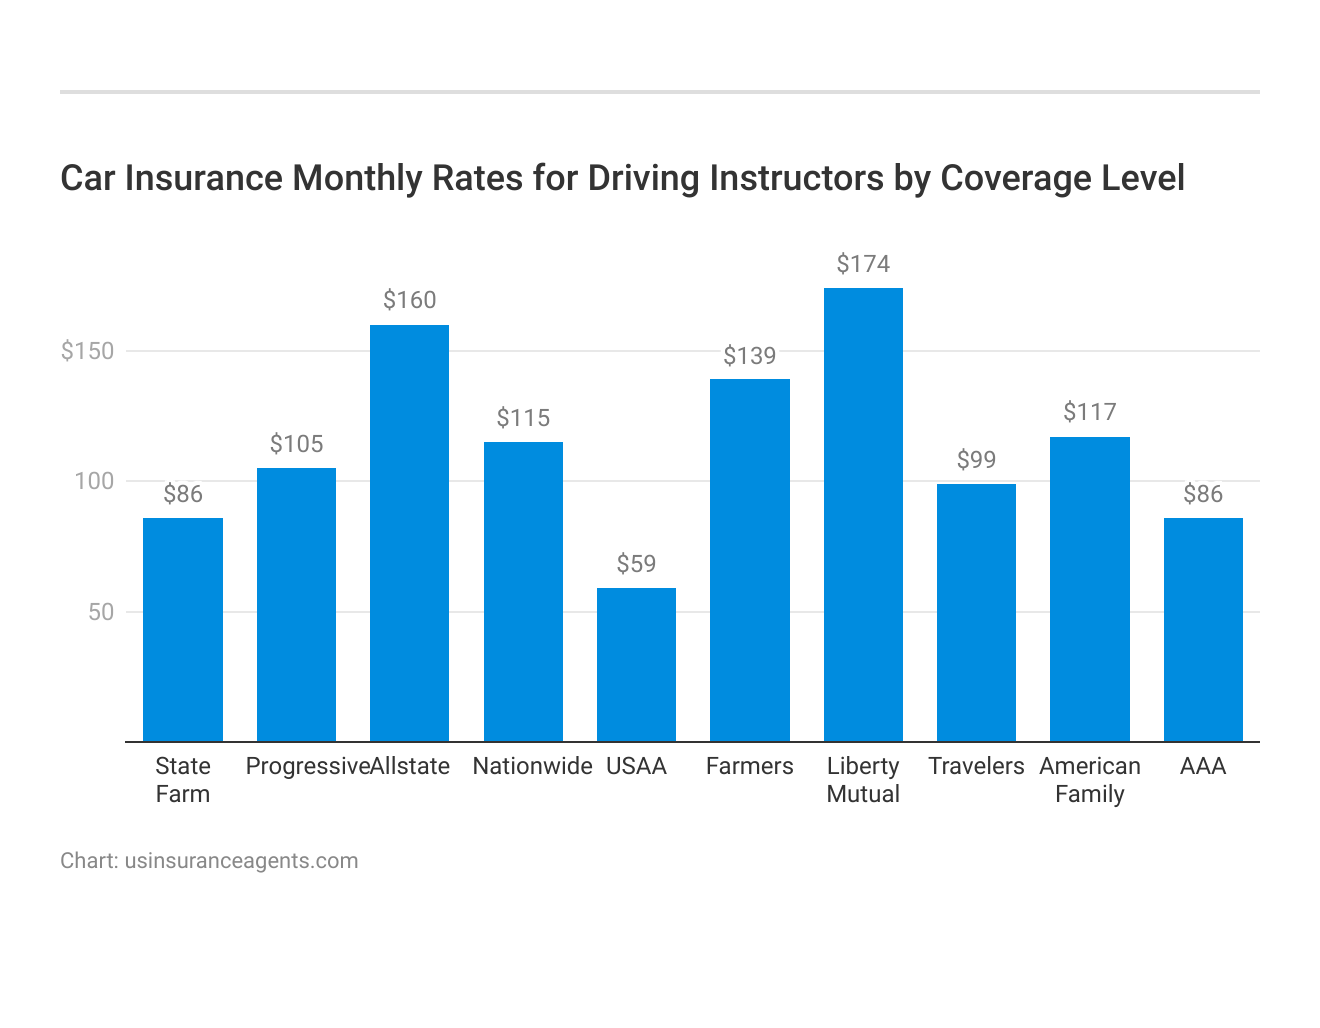 <h3>Car Insurance Monthly Rates for Driving Instructors by Coverage Level</h3>